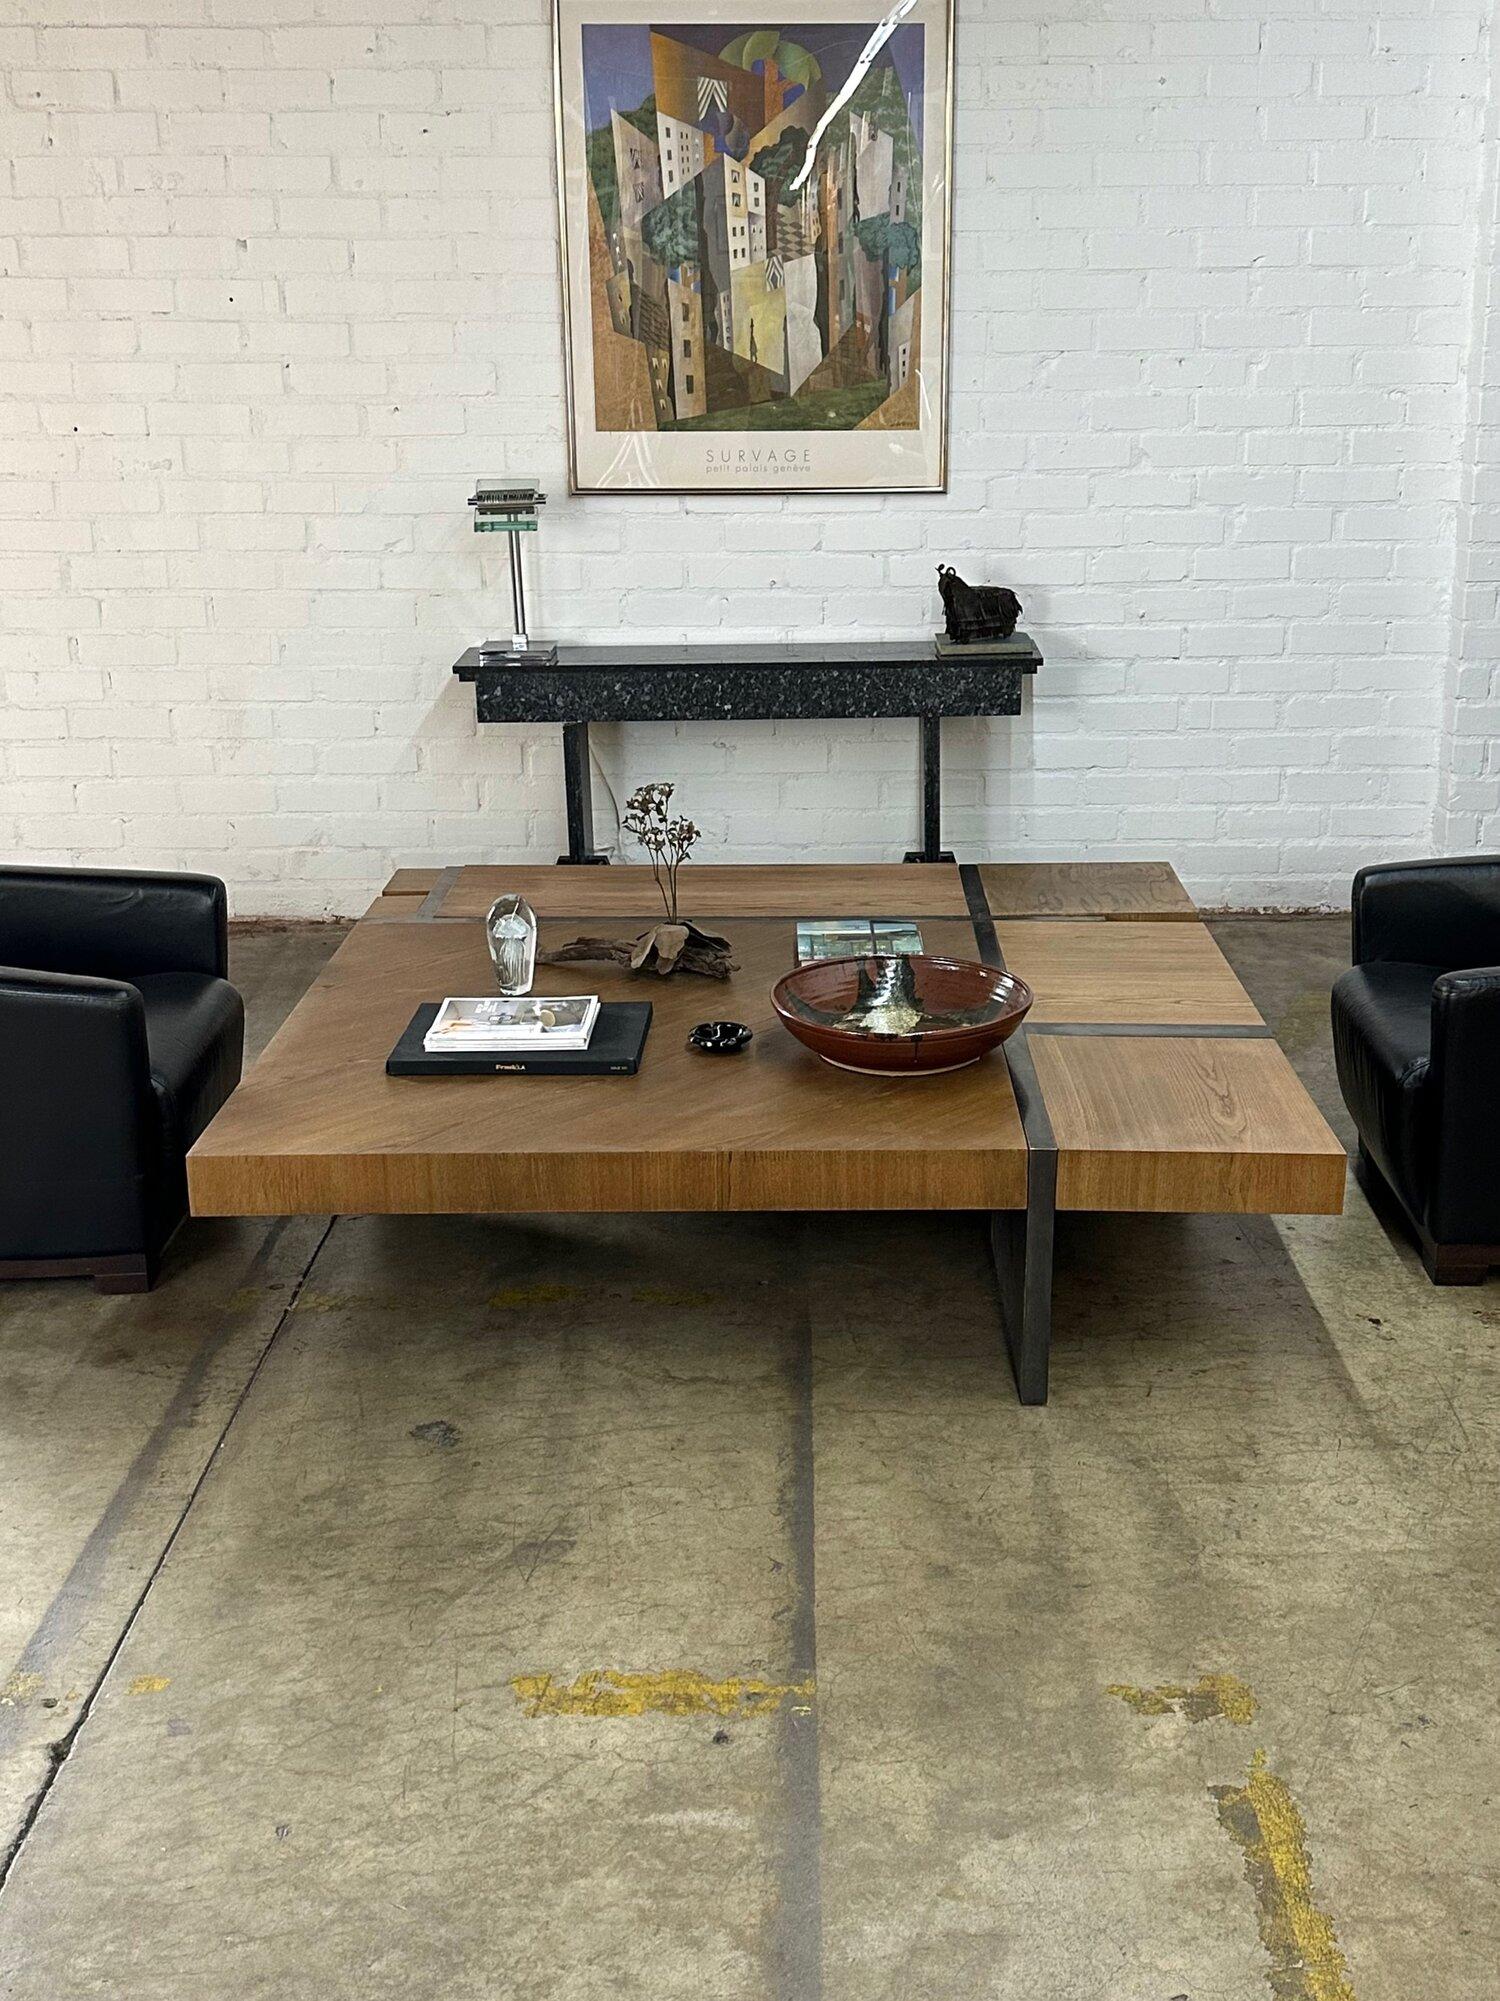 W70.25 D70 H17.5

Gently used variation of the Duplex Furniture by Hudson Furniture company in New York. Item has a solid metal frame that seems to be patinated bronze. Item has been refinished and does shows minor imperfections to wood but overall